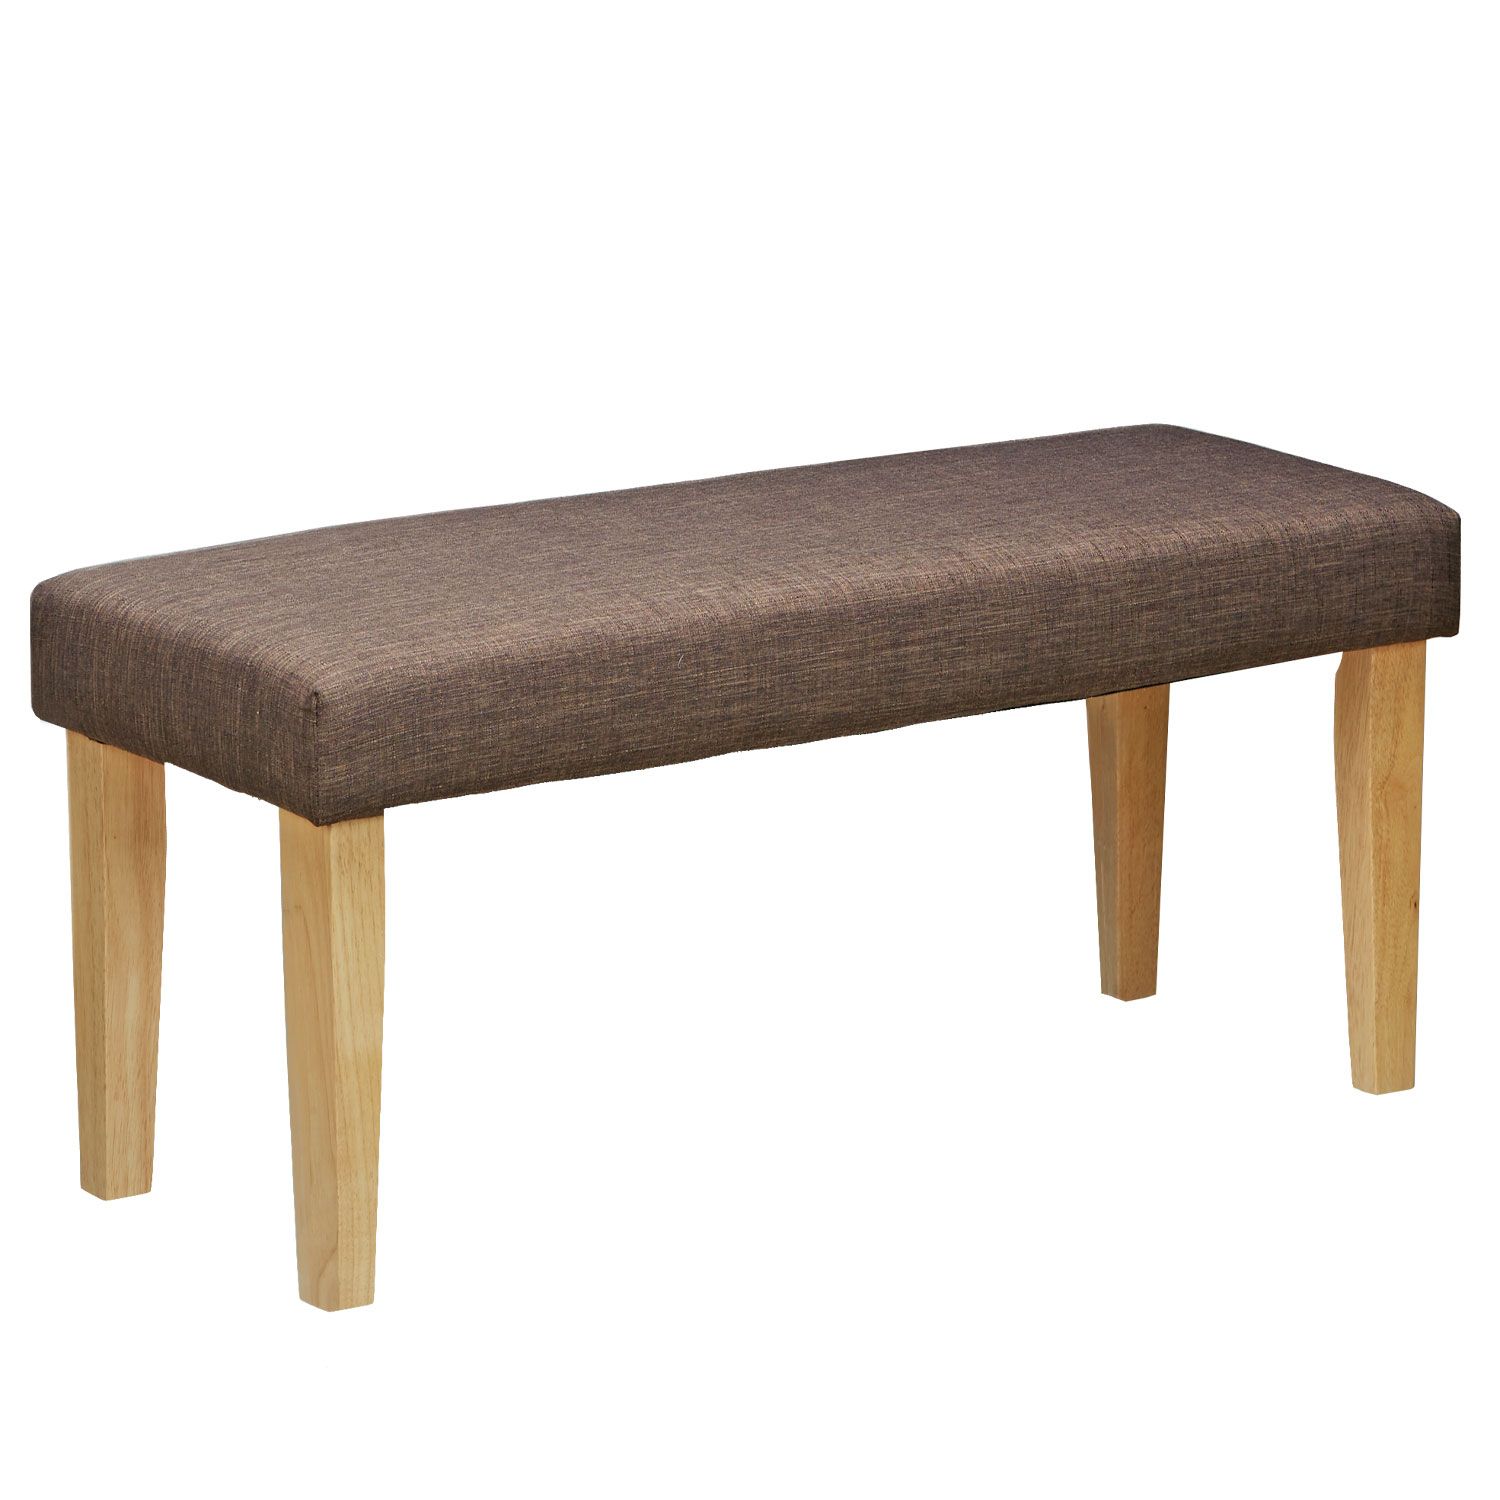 Upholstered Bench Brown Seat Bench Side Bench Stool Seating 103 cm